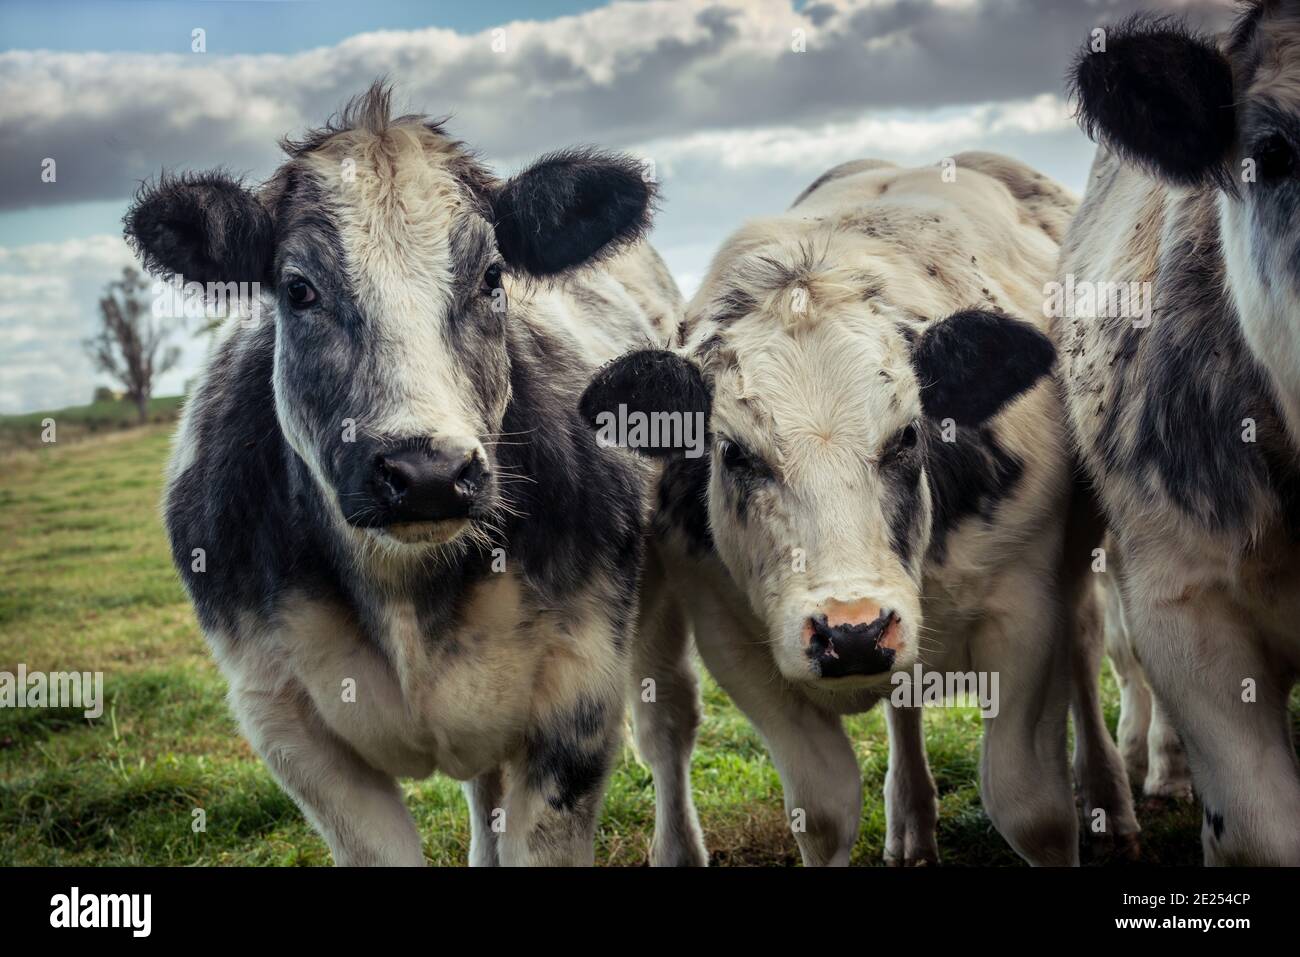 Curious shaggy cows staring into the camera lens on a cold autumn day in the Dutch countryside. Photograph: Dutch countryside near Alem in Holland, Th Stock Photo